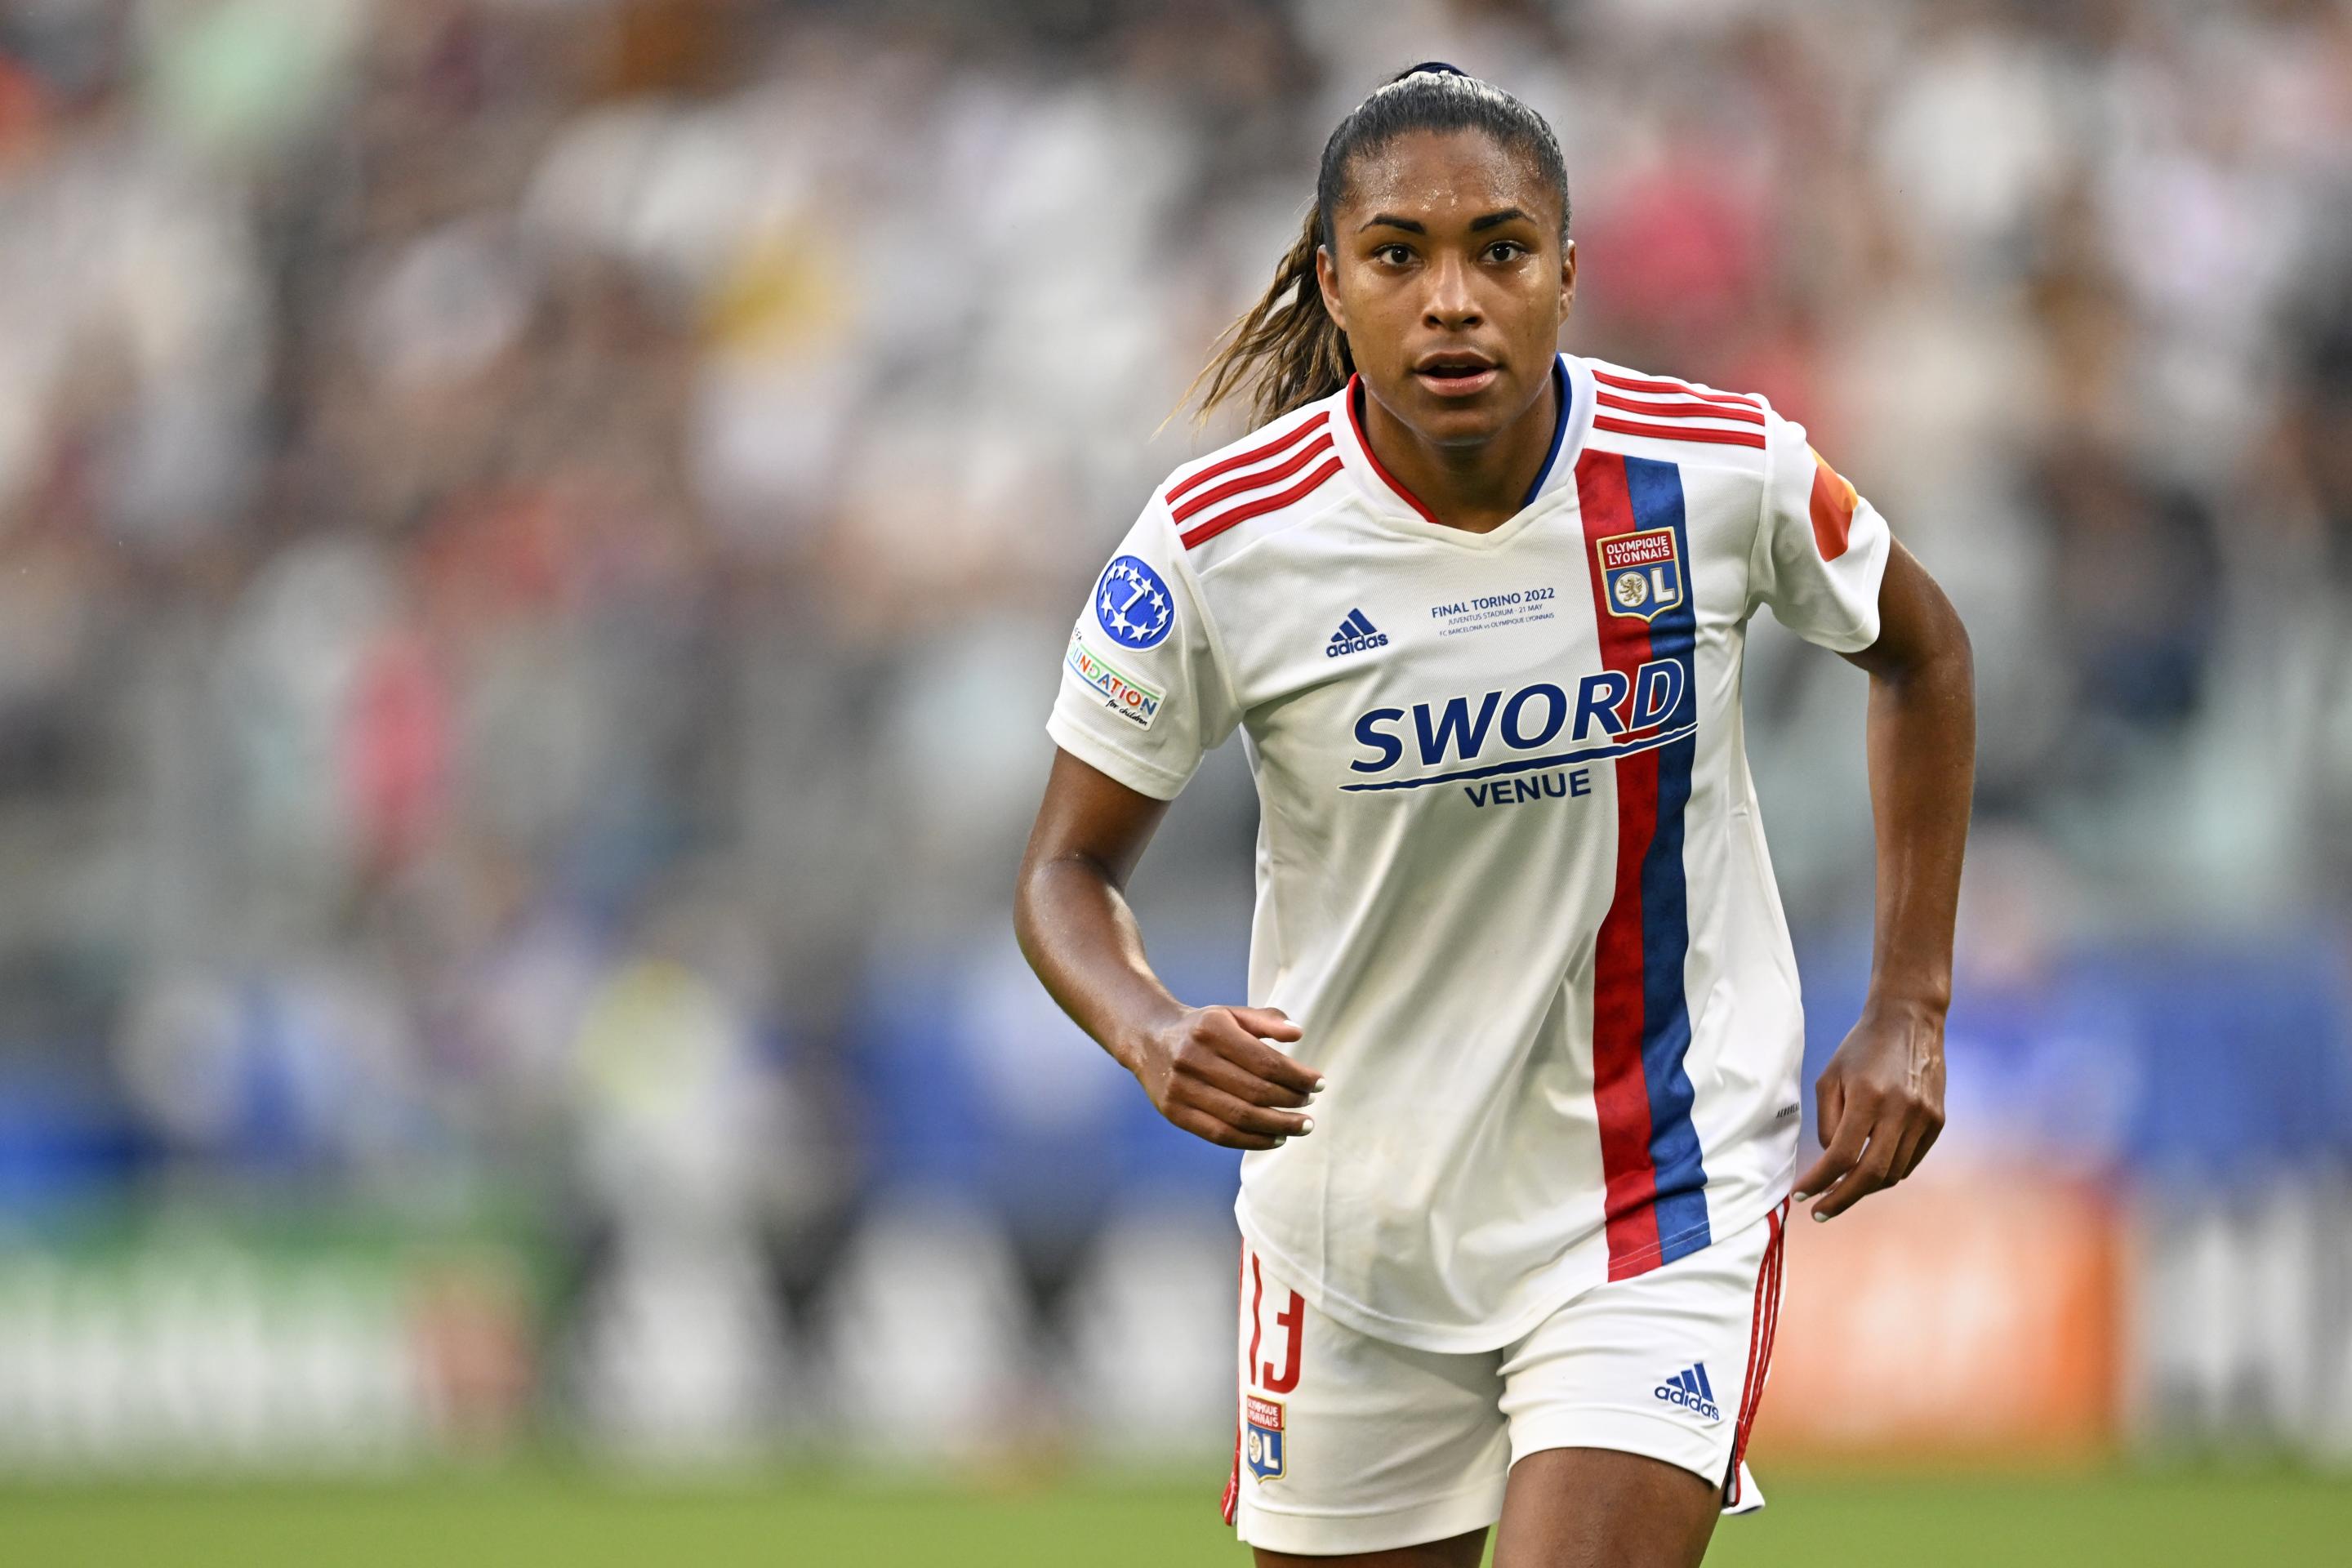 TURIN - Catarina Macario of Olympique Lyonnais women during the UEFA Women's Champions League Final between Barcelona FC and Olympique Lyon at the Juventus Stadium on May 21, 2022 in Turin, Italy. ANP | DUTCH HEIGHT | GERRIT FROM COLOGNE (Photo by ANP via Getty Images)